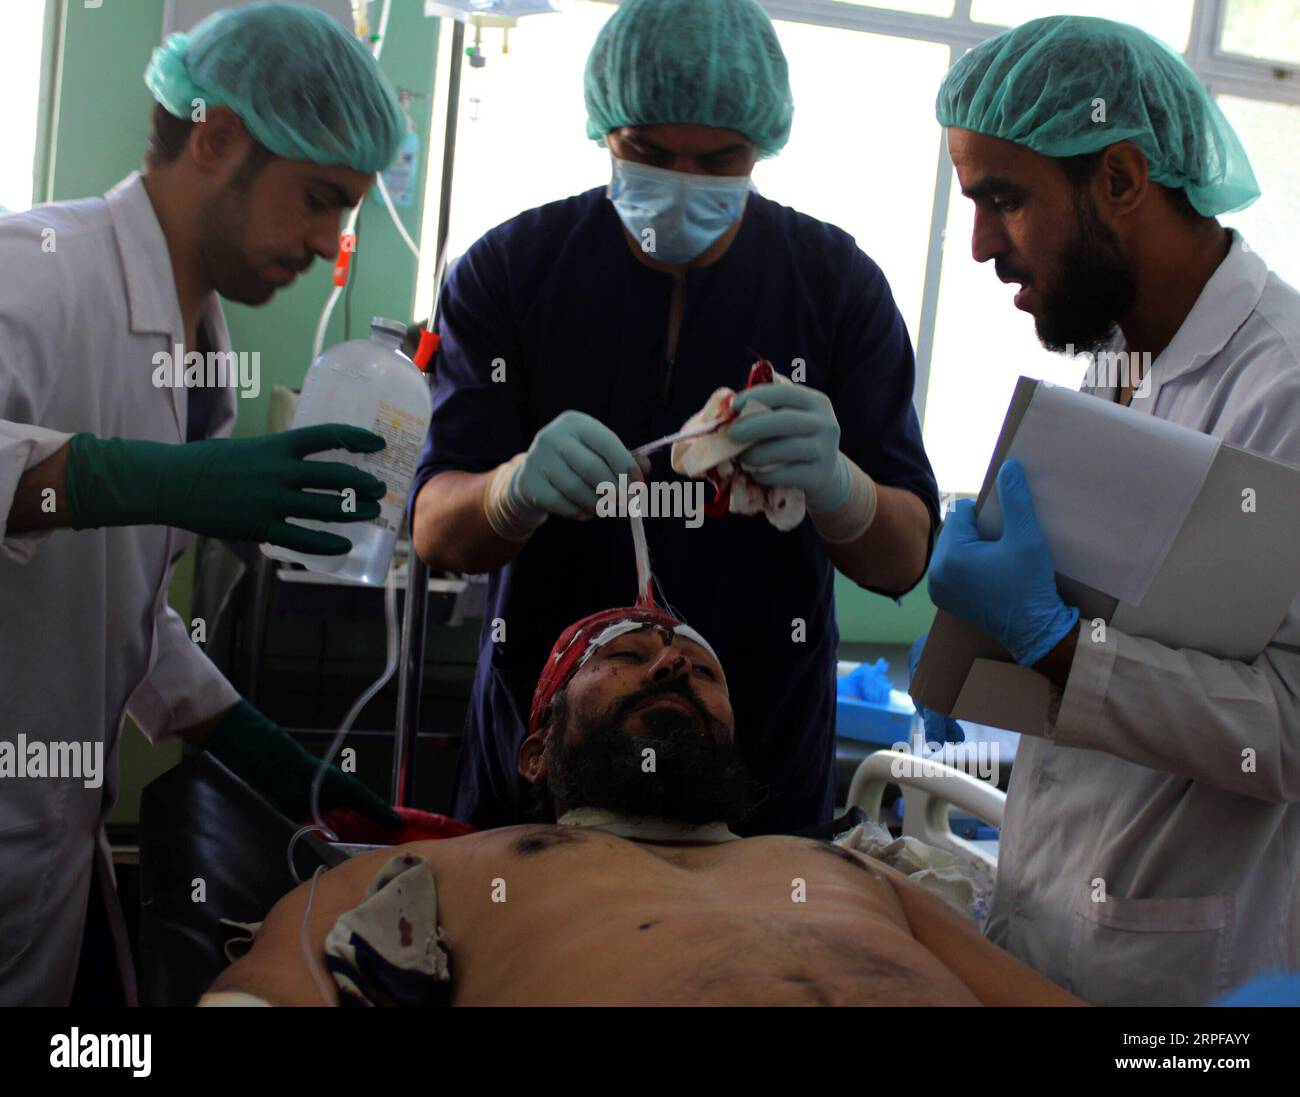 190919 -- KANDAHAR, Sept. 19, 2019 Xinhua -- A man injured in a car bomb at Zabul province receives medical treatment at a hospital in Kandahar city, southern Afghanistan, Sept. 19, 2019. The death toll of a car bomb on Thursday that rocked Qalat city, the capital of southern Afghanistan s Zabul province, has risen to 20, with over 93 others wounded, provincial government spokesman Gul Islam Sayal said. Photo by Sanaullah Seiam/Xinhua SPOT NEWS AFGHANISTAN-ZABUL-CAR BOMB-DEATH TOLL PUBLICATIONxNOTxINxCHN Stock Photo